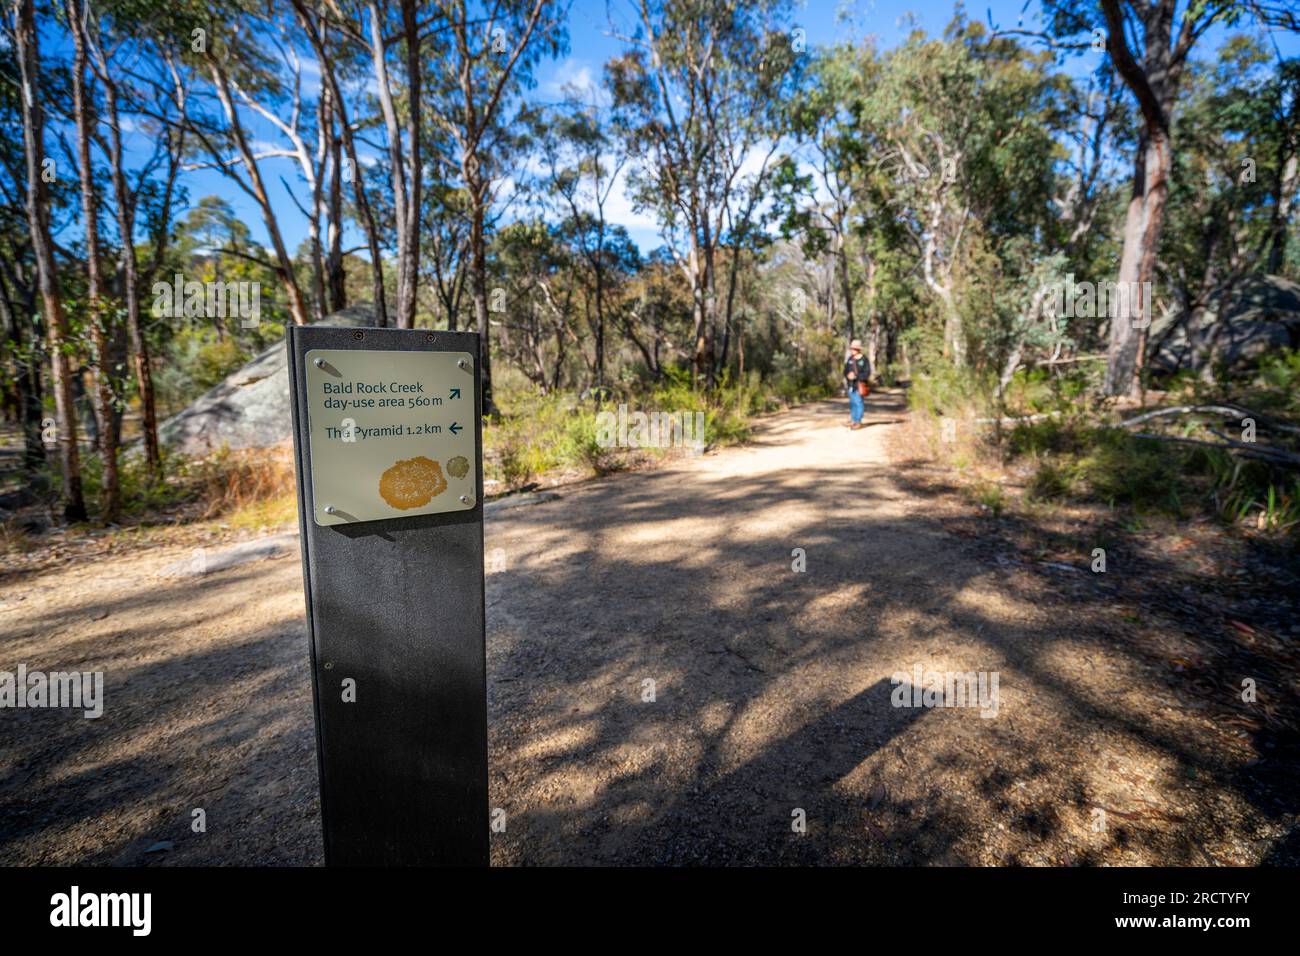 Wooden signpost with track directions beside walking path, Pyramid walking track, Girraween National Park, Southeast Queensland, Australia Stock Photo